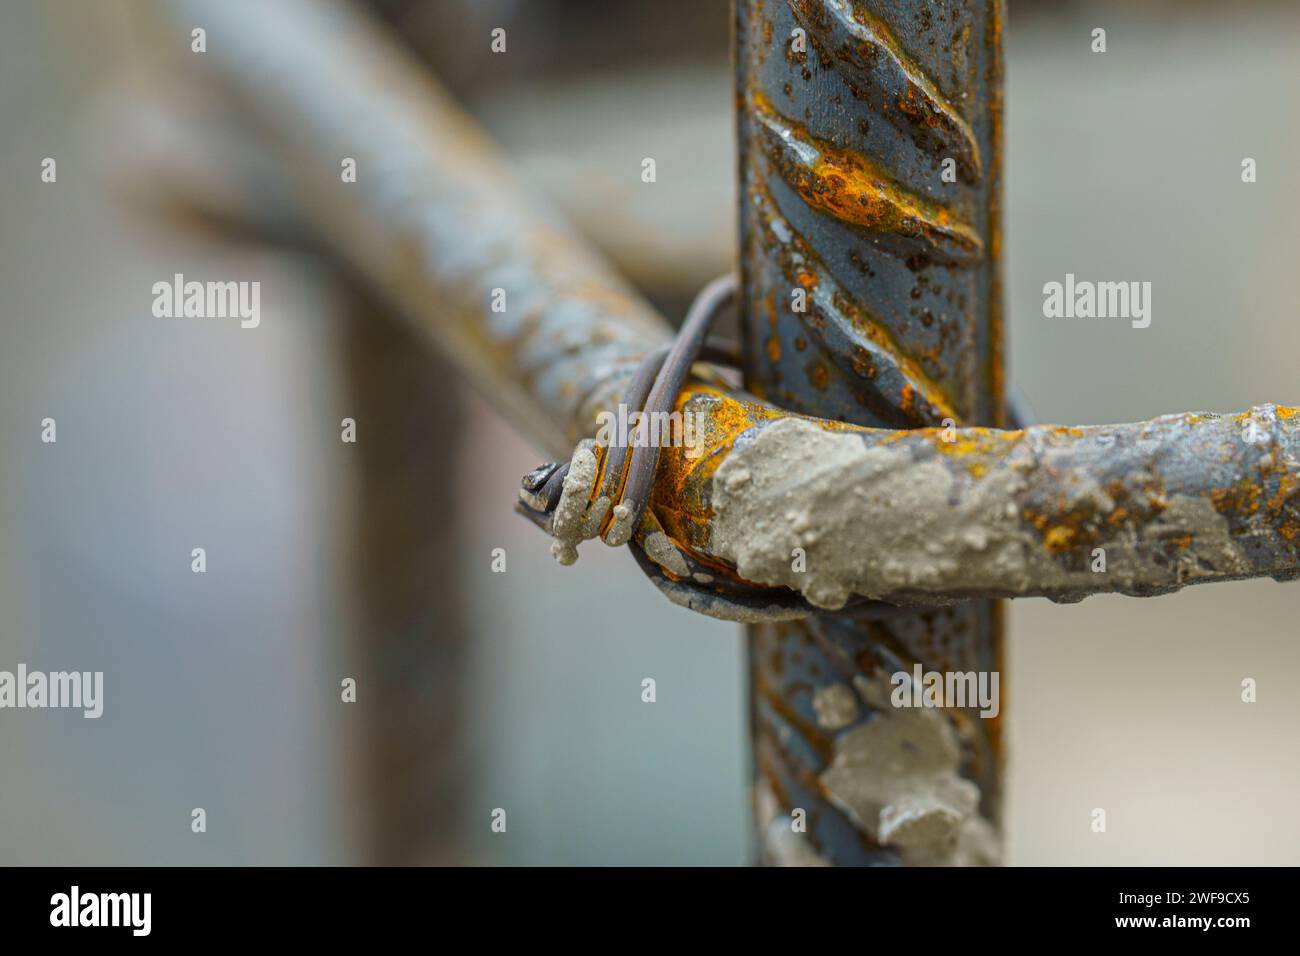 Rusty wire exposed as handle and rope bend downwards Stock Photo